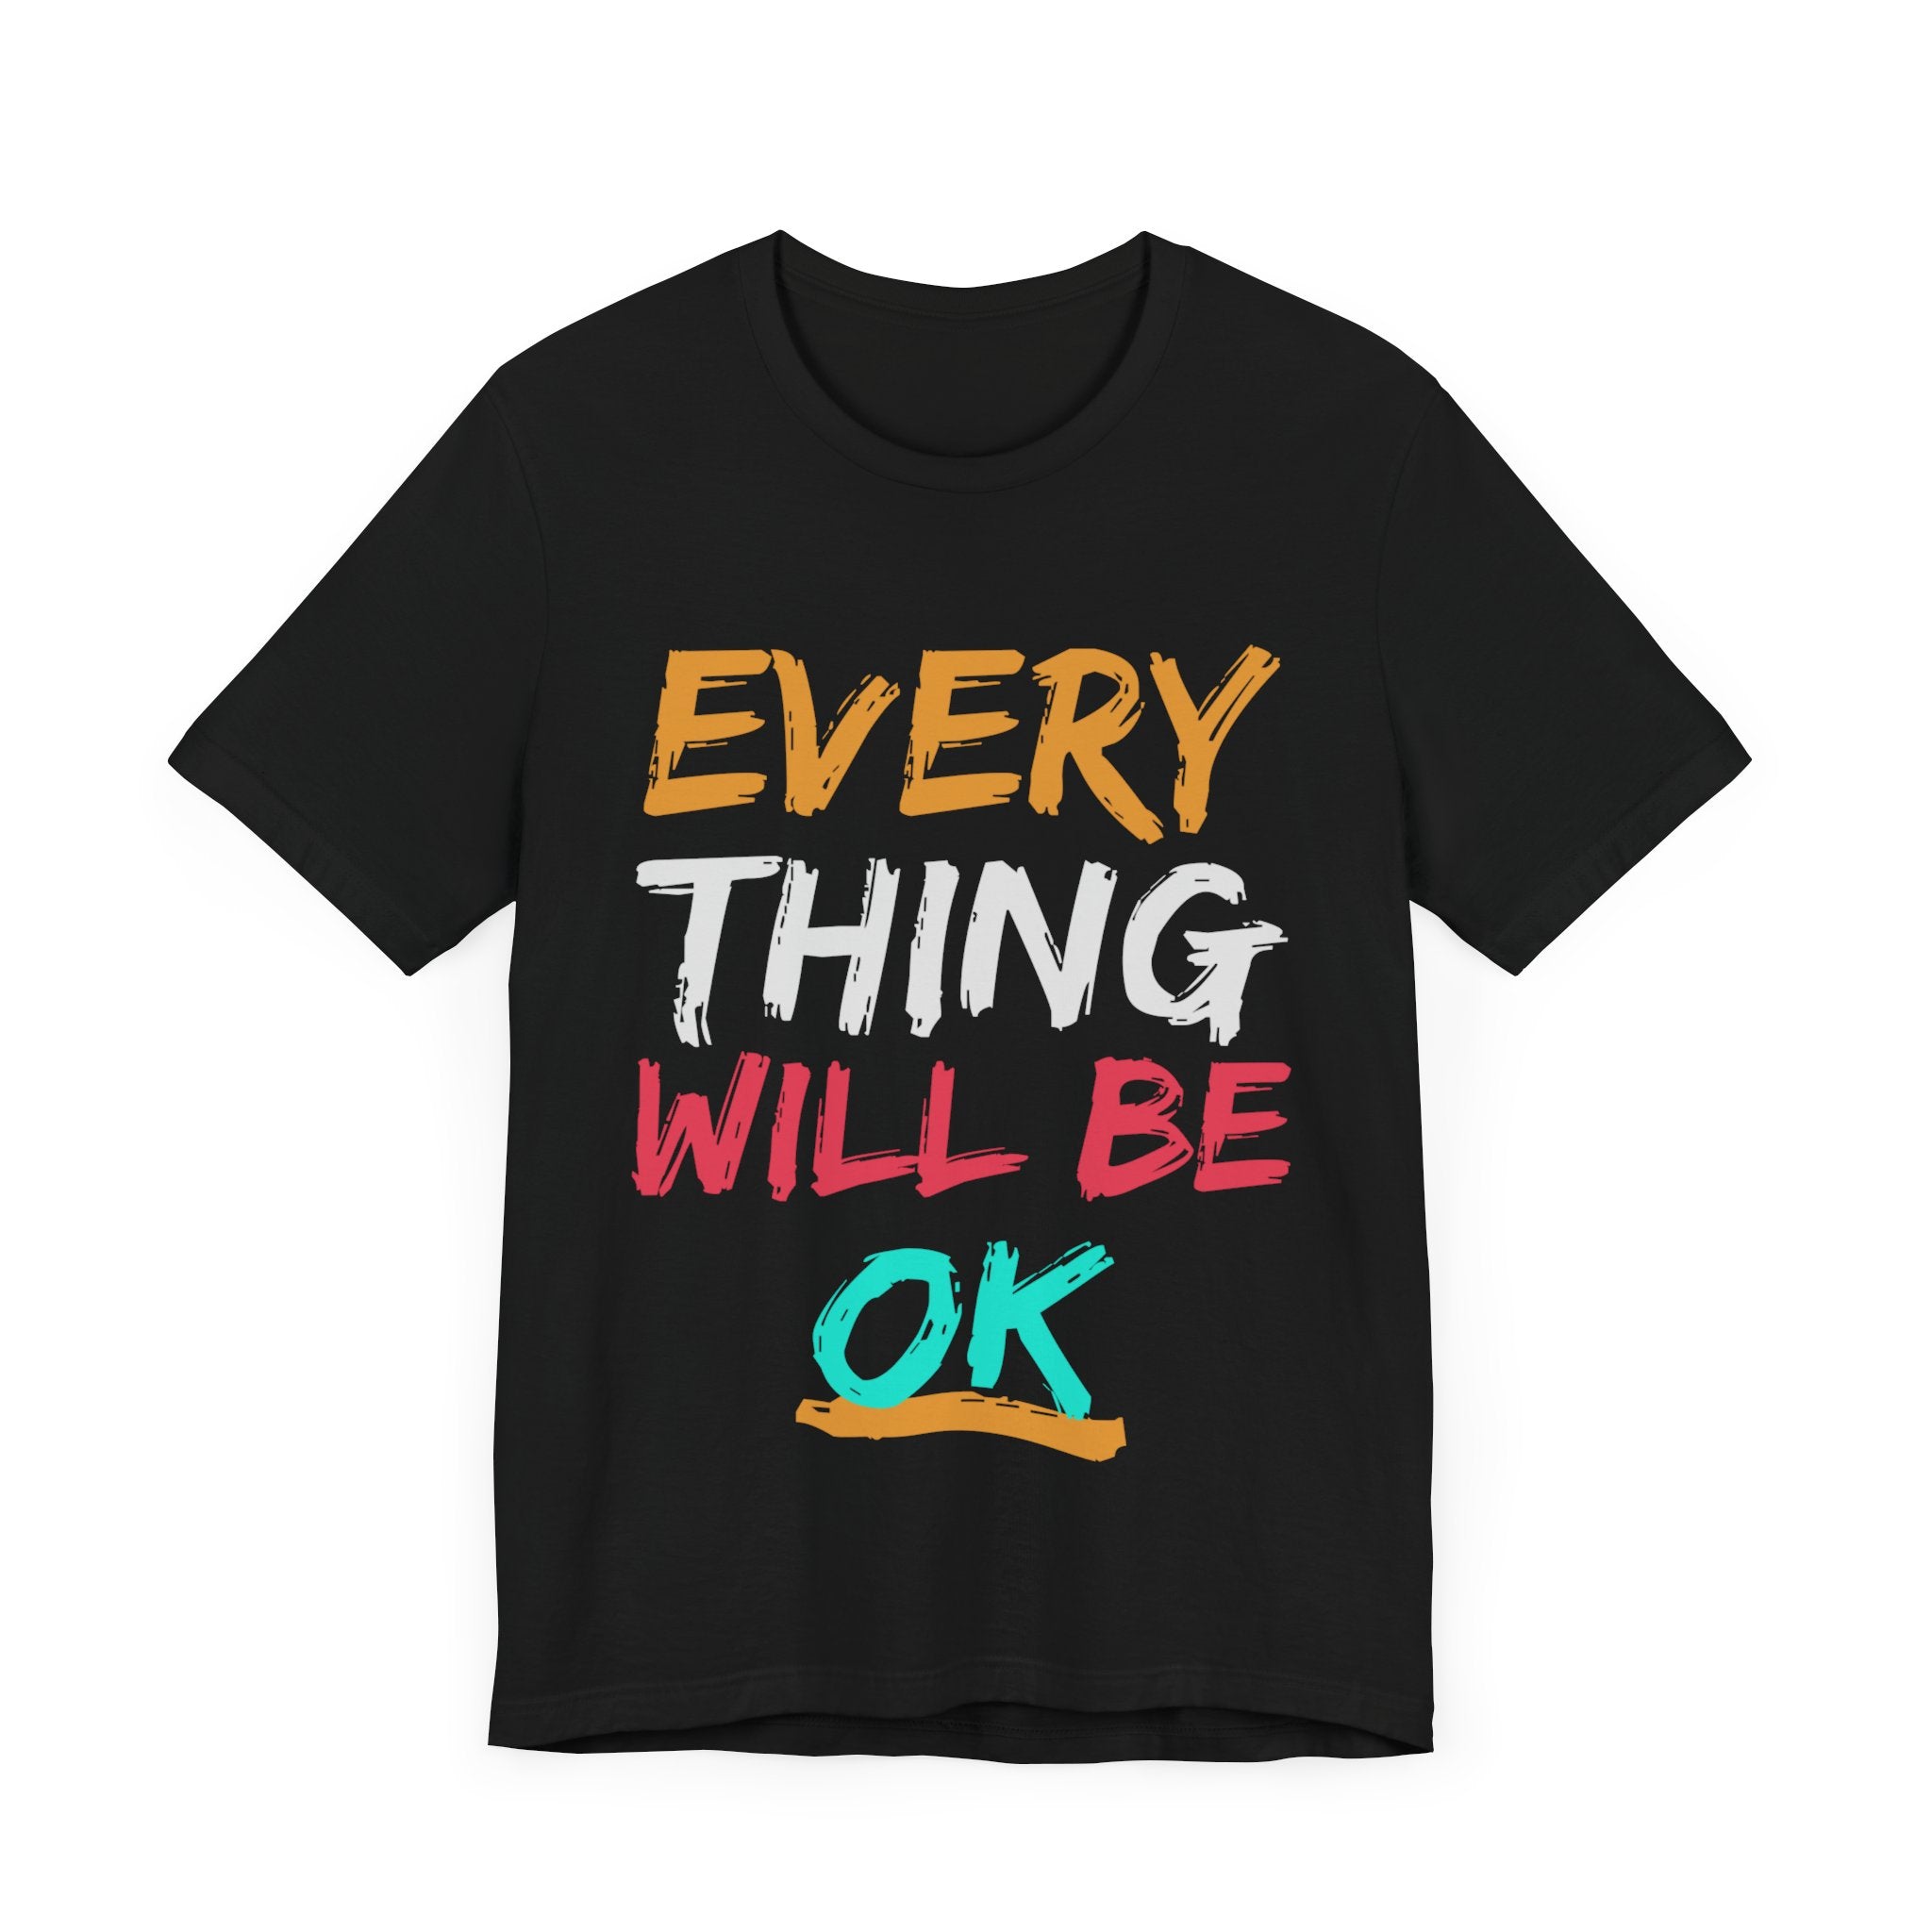 Everything will be Ok - T-Shirt